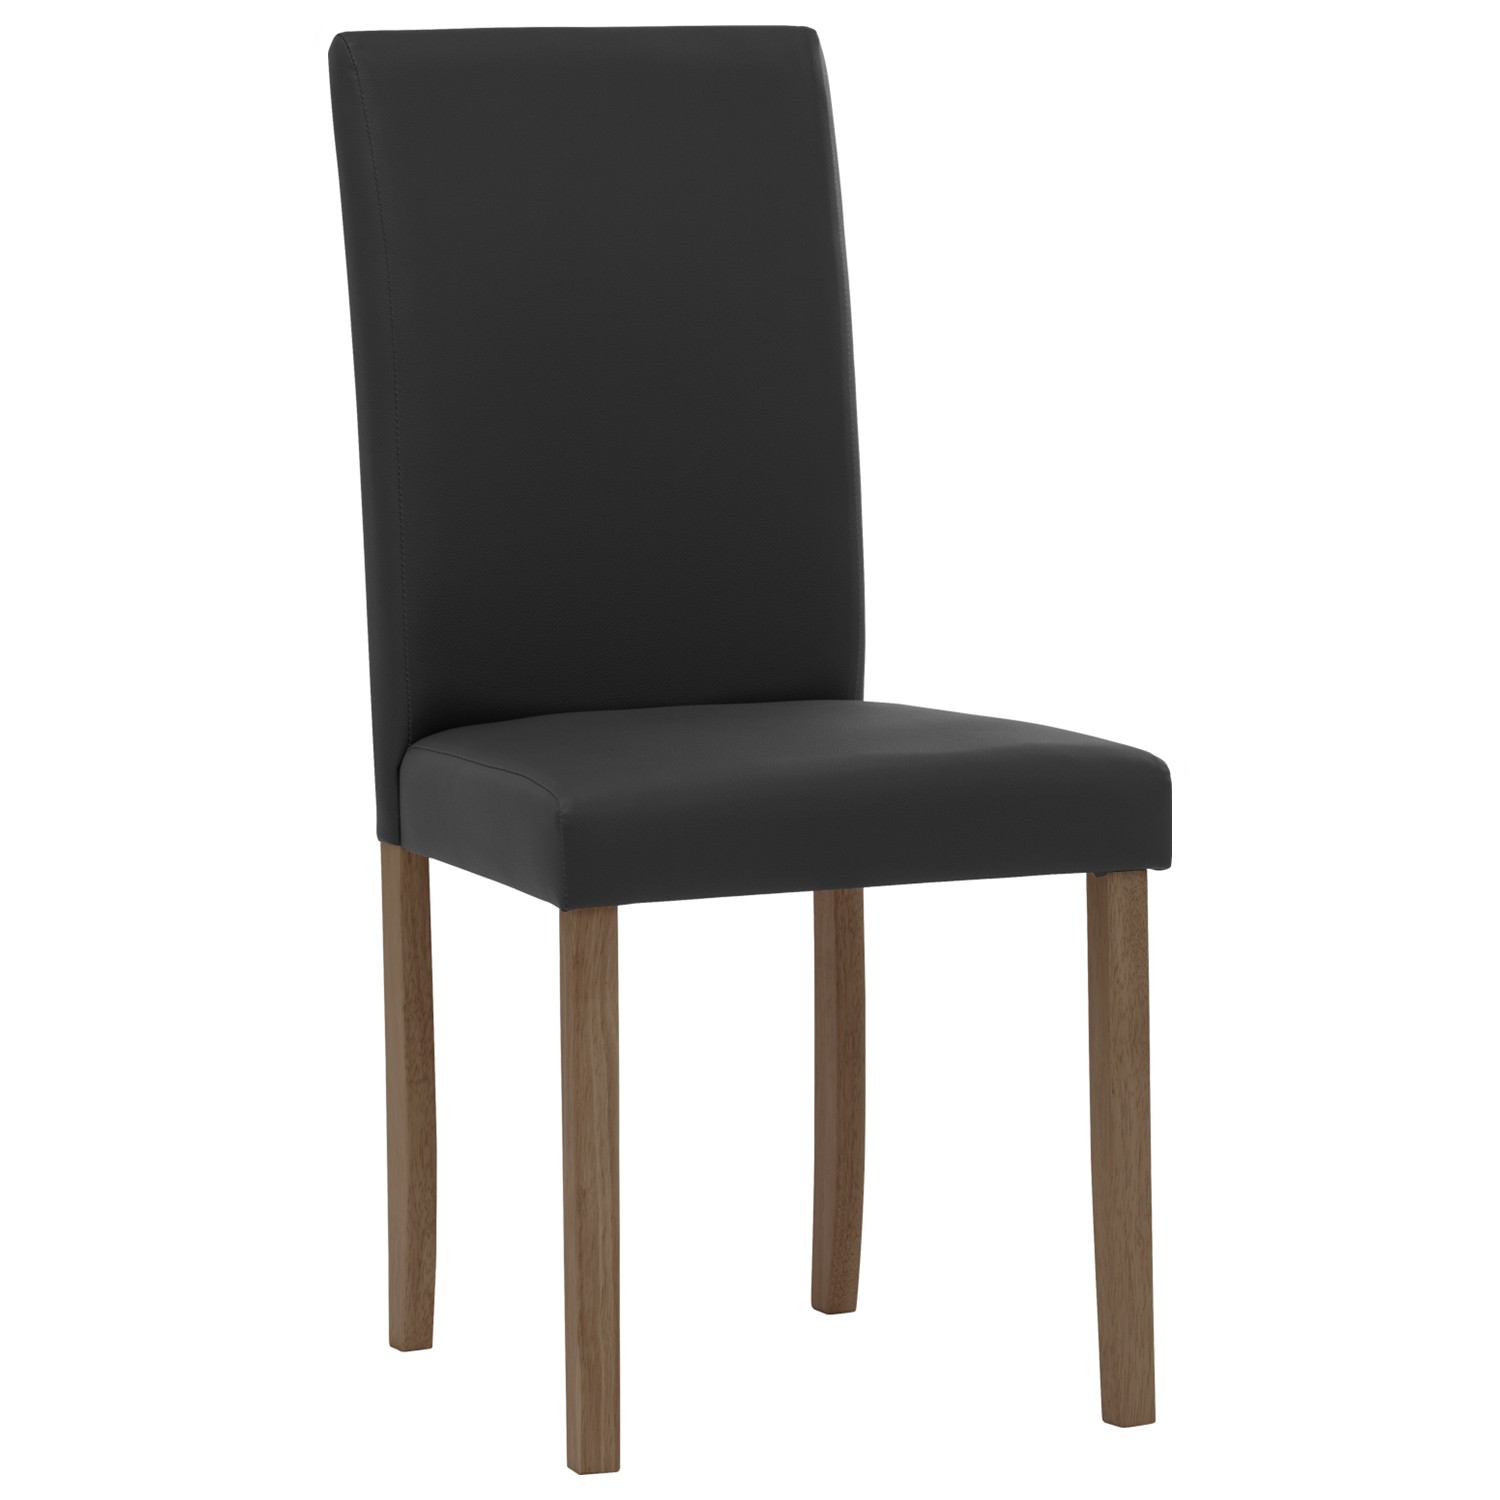 LENORE DINING CHAIR 109/530